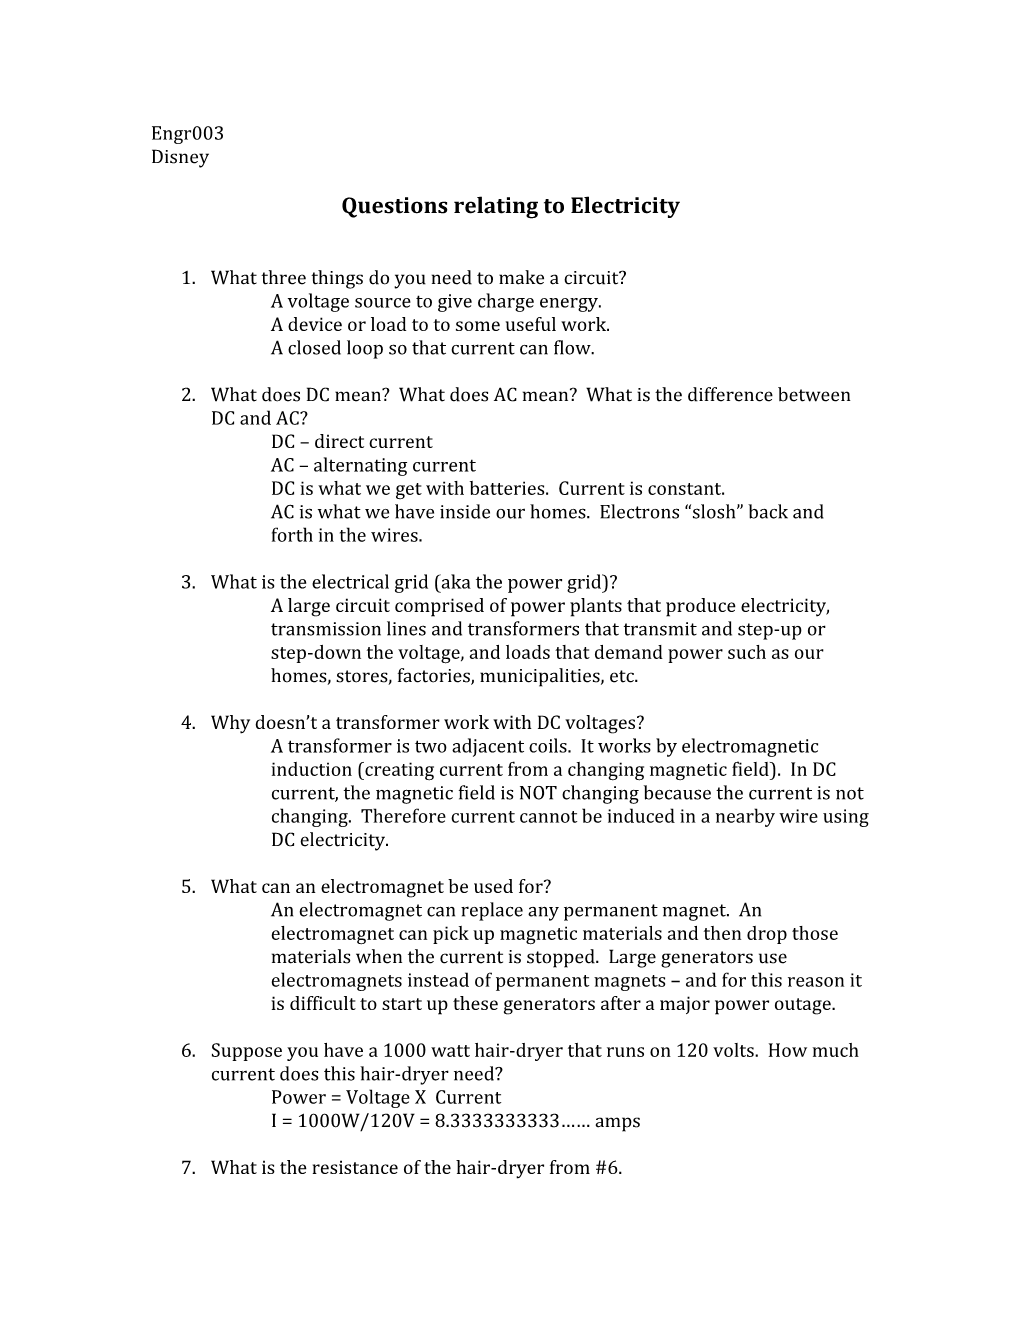 Questions Relating to Electricity